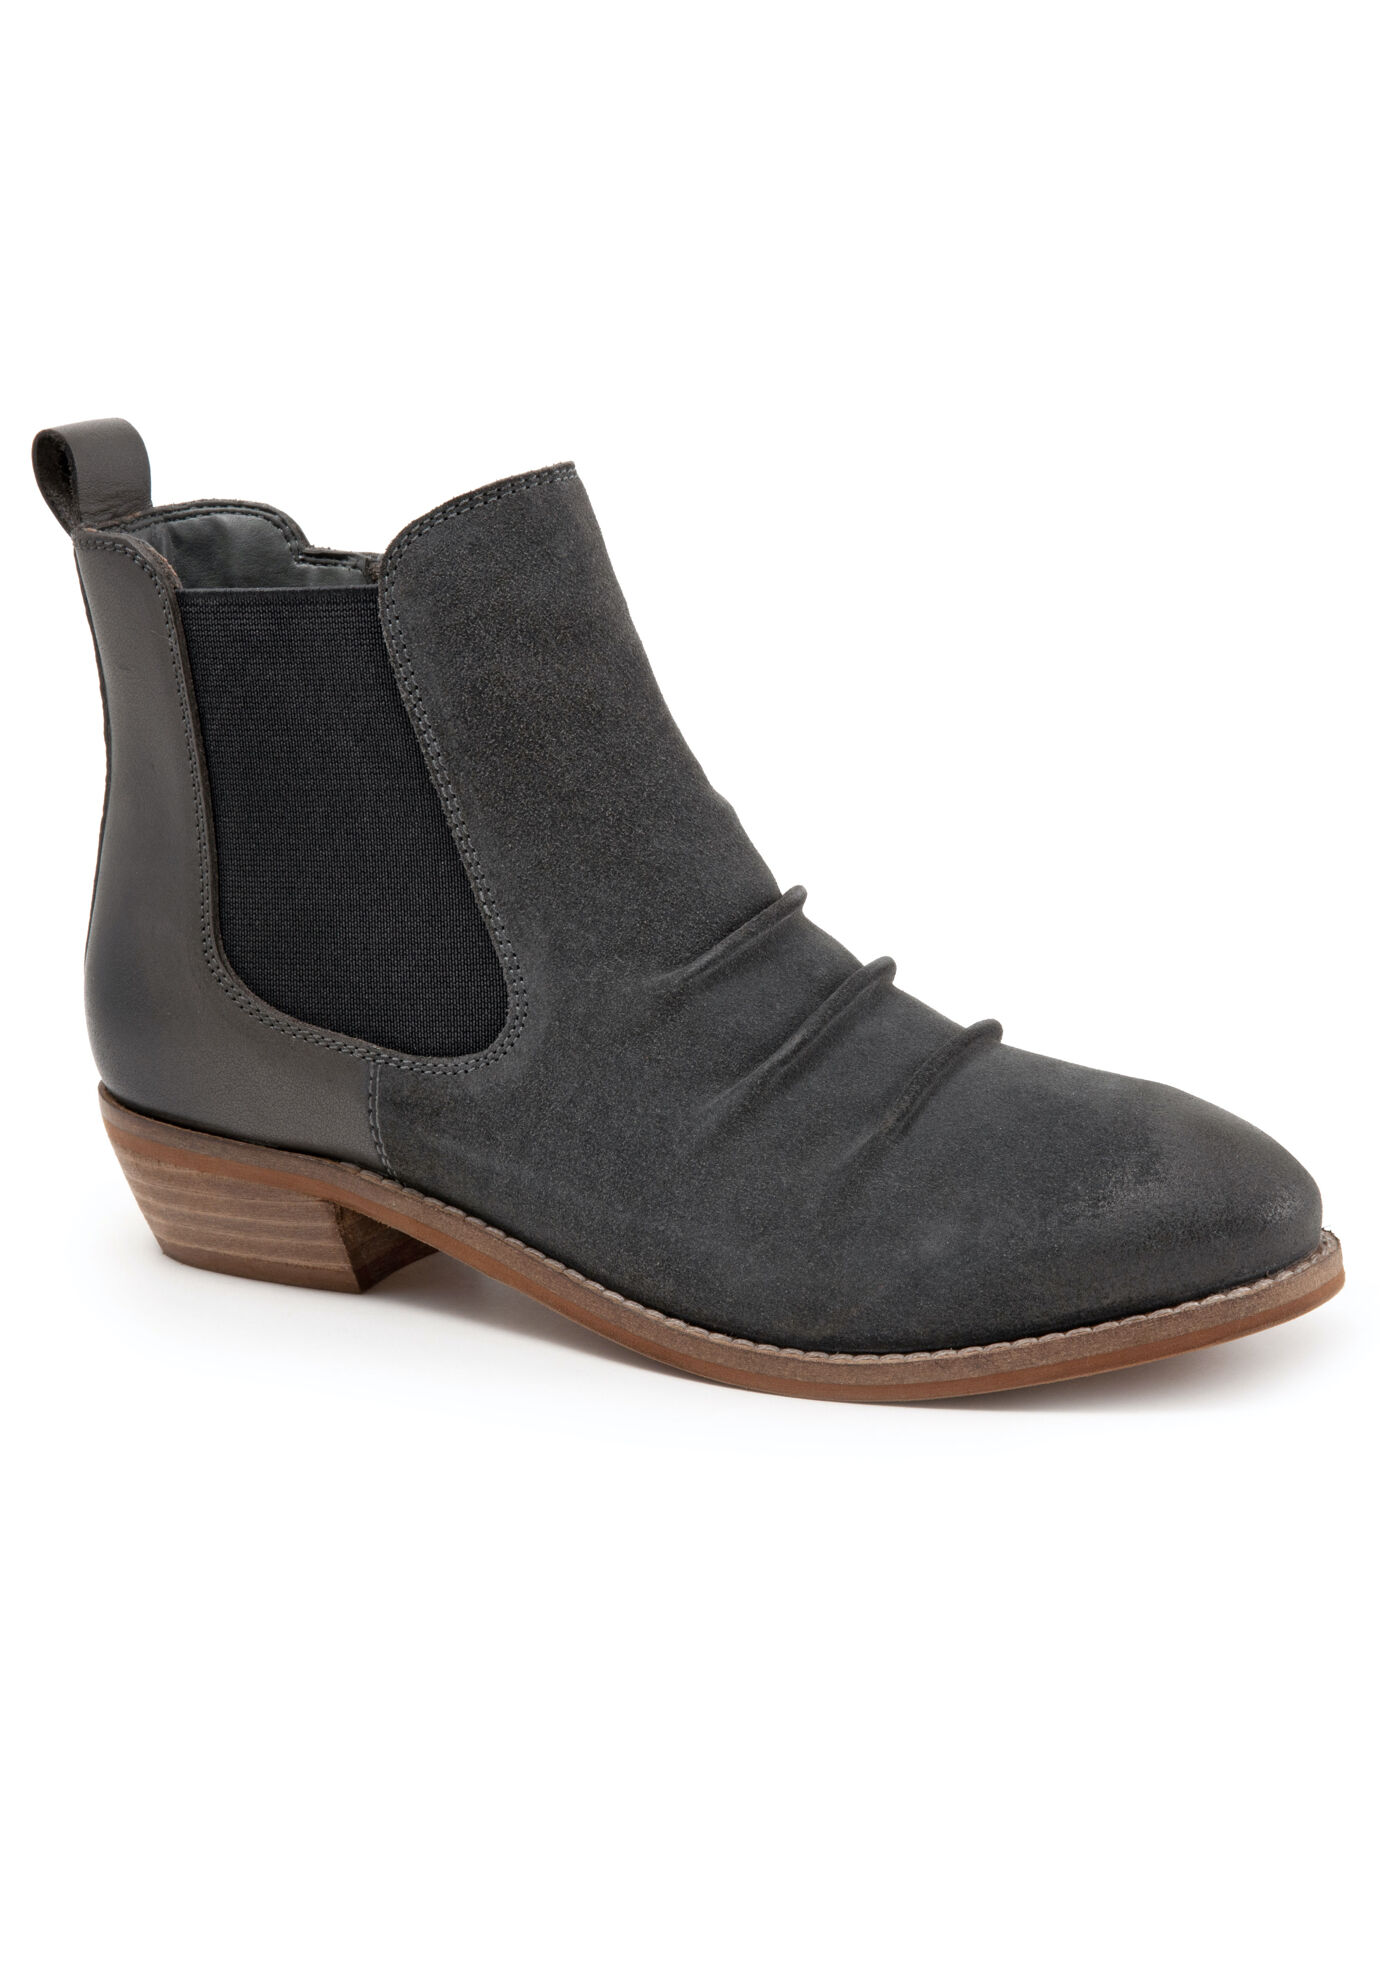 Extra Wide Width Women's Rockford Boot by SoftWalk in Charcoal Suede (Size 9 WW)